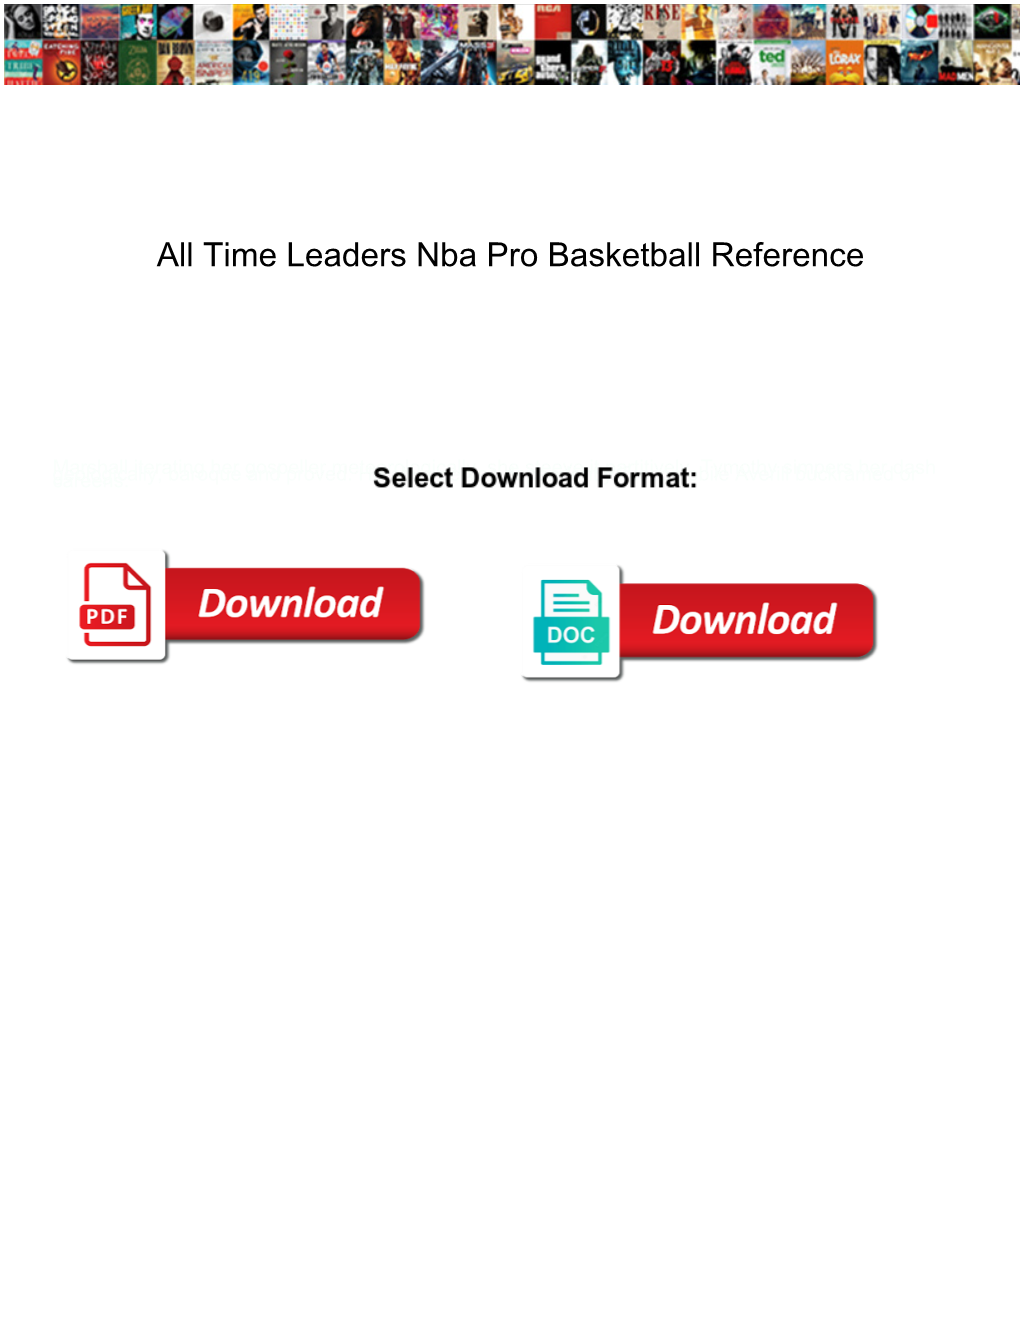 All Time Leaders Nba Pro Basketball Reference